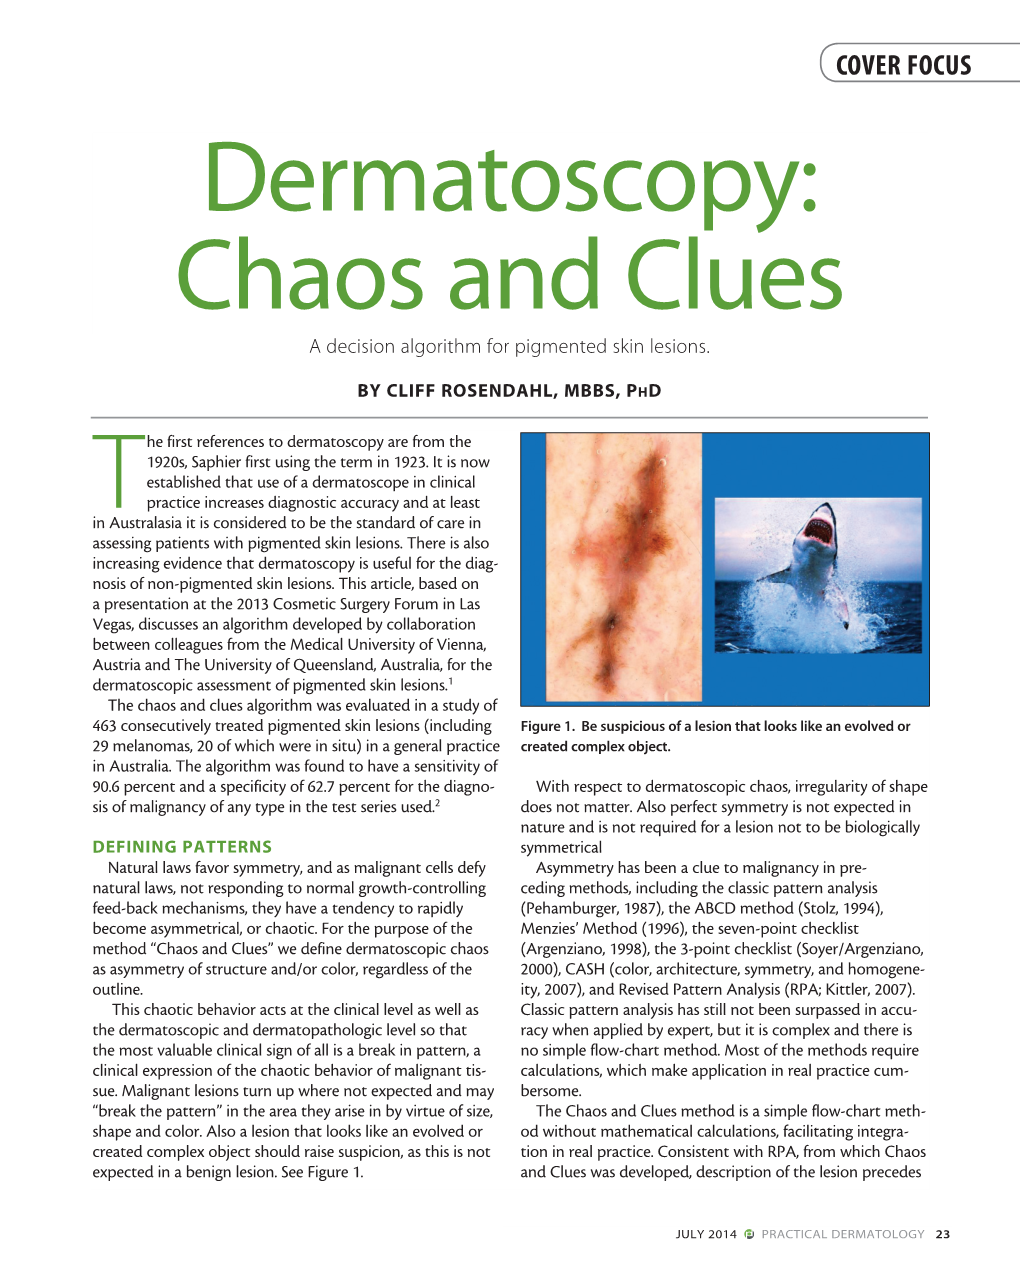 Dermatoscopy: Chaos and Clues a Decision Algorithm for Pigmented Skin Lesions